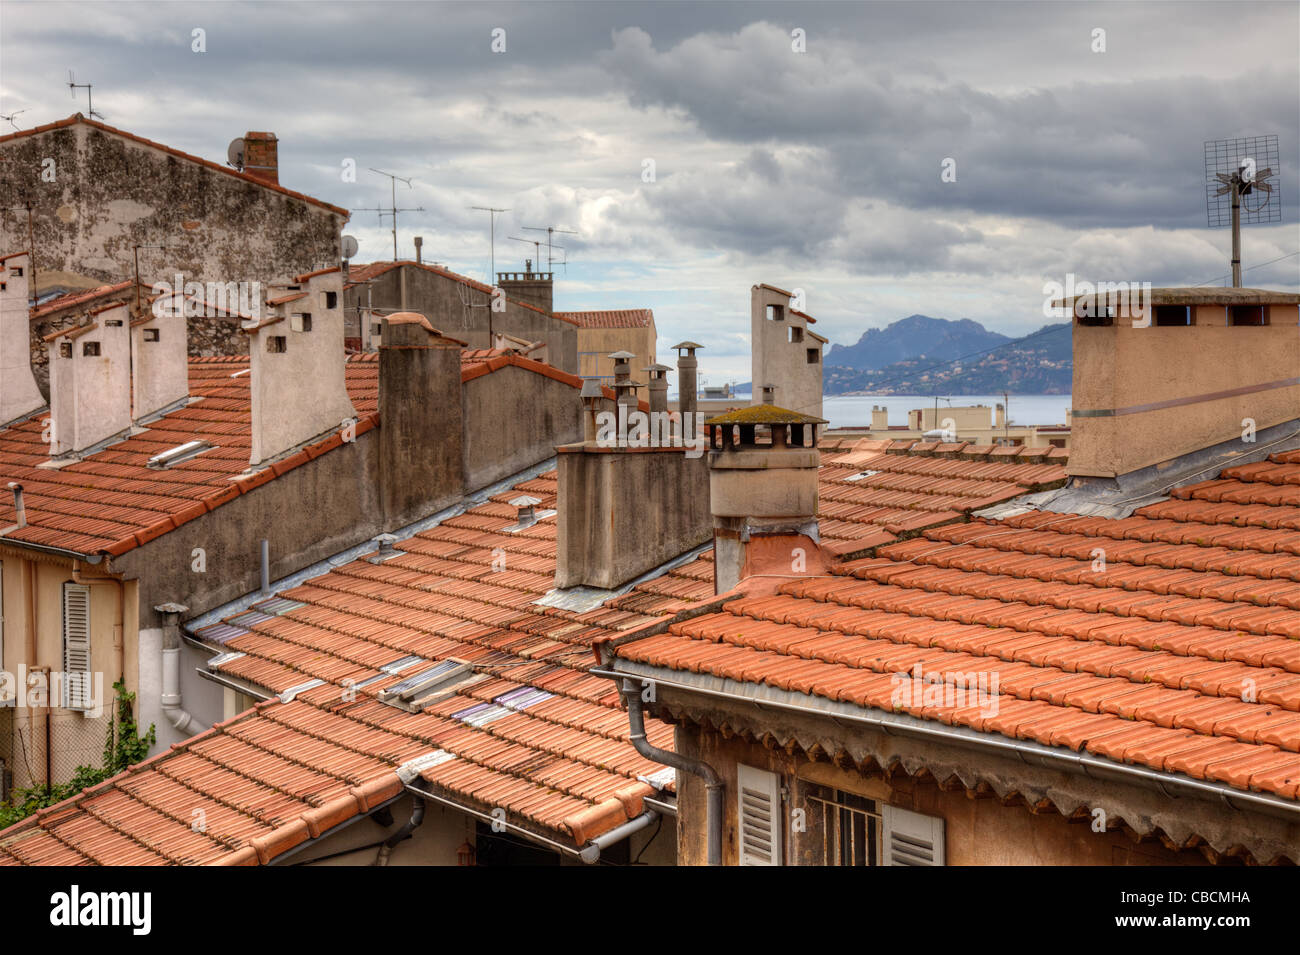 France, Cannes old town rooftop. Cote Azur or french riviera residential real estate roof view. South Provence narrow downtown center living housing. Stock Photo